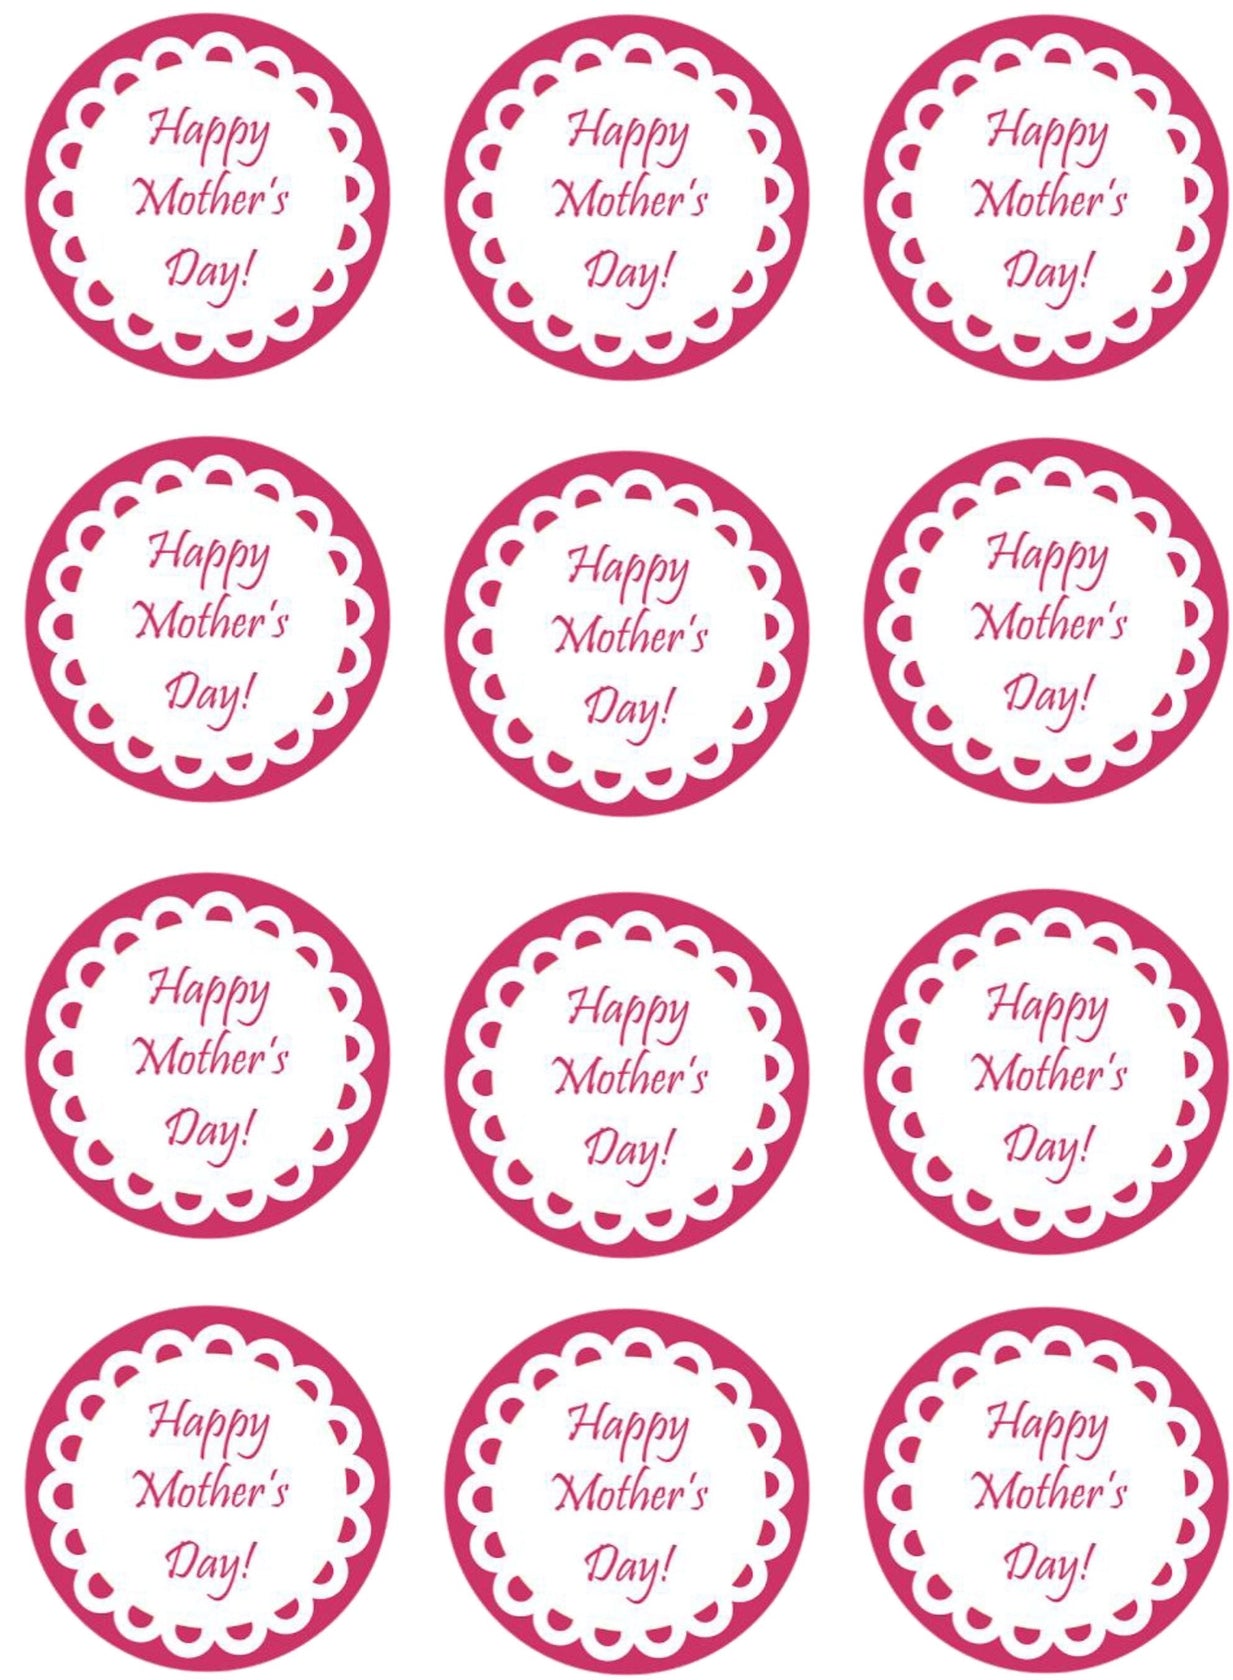 Happy Mother's Day! Edible Cupcake Topper Images ABPID55793